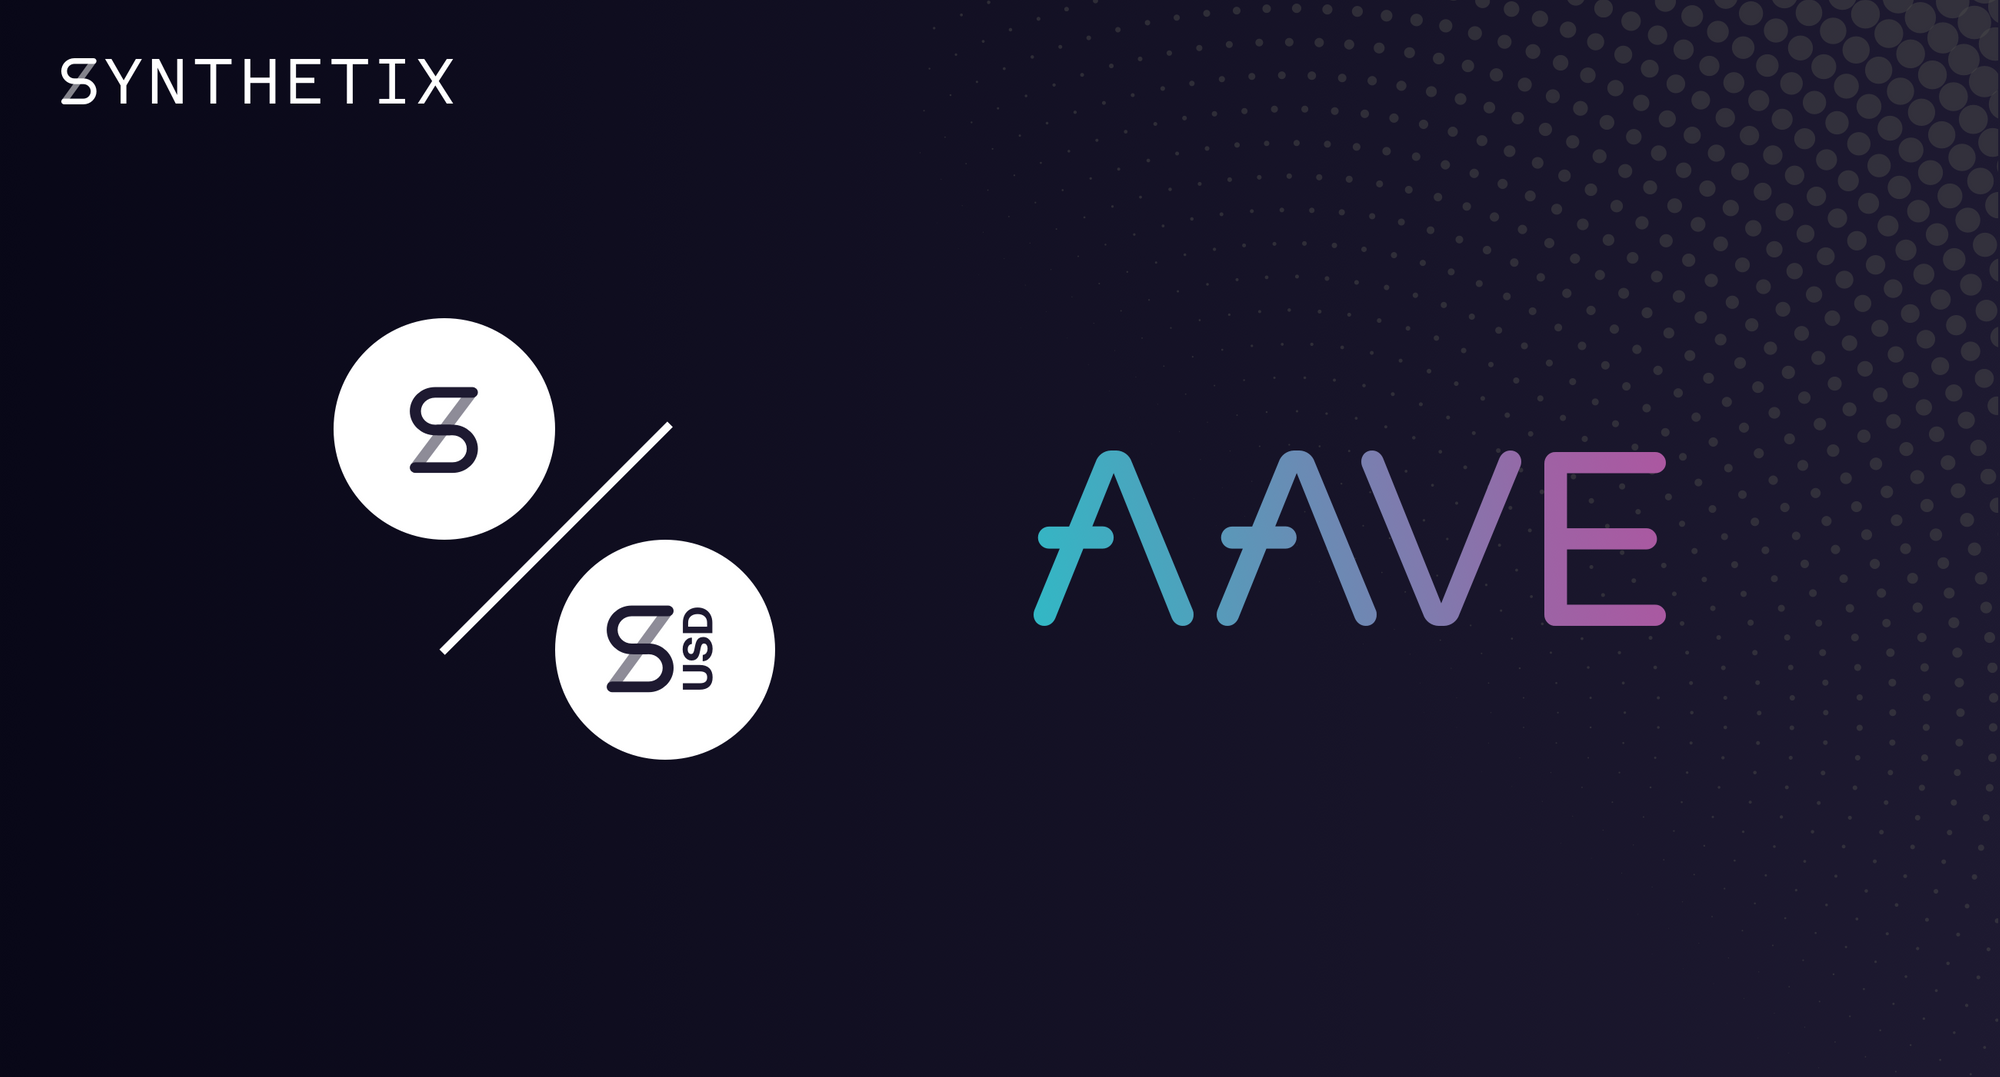 sUSD and SNX are now available in Aave Protocol for lending and borrowing!